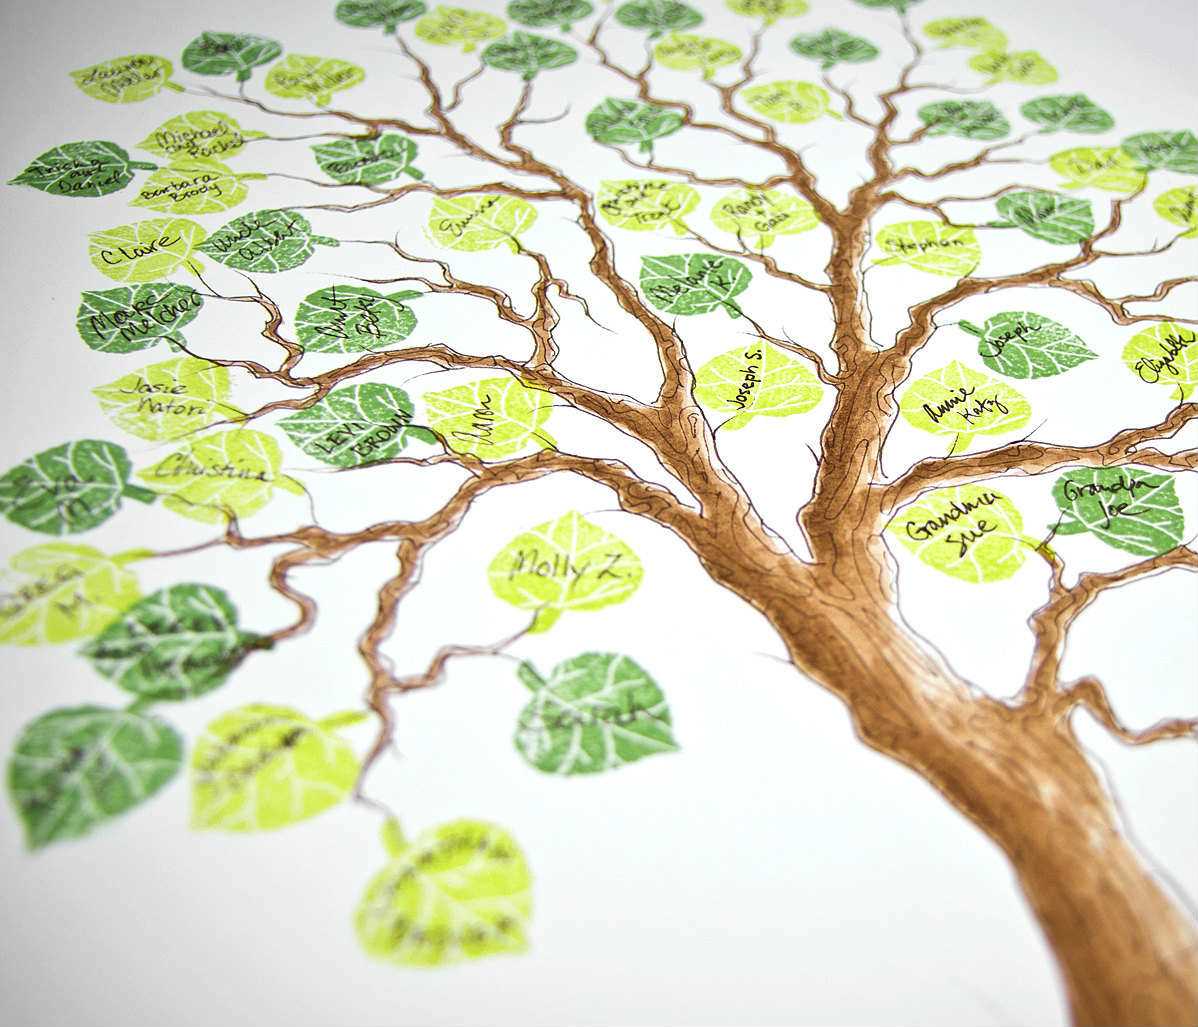 Family Tree with thumbprints